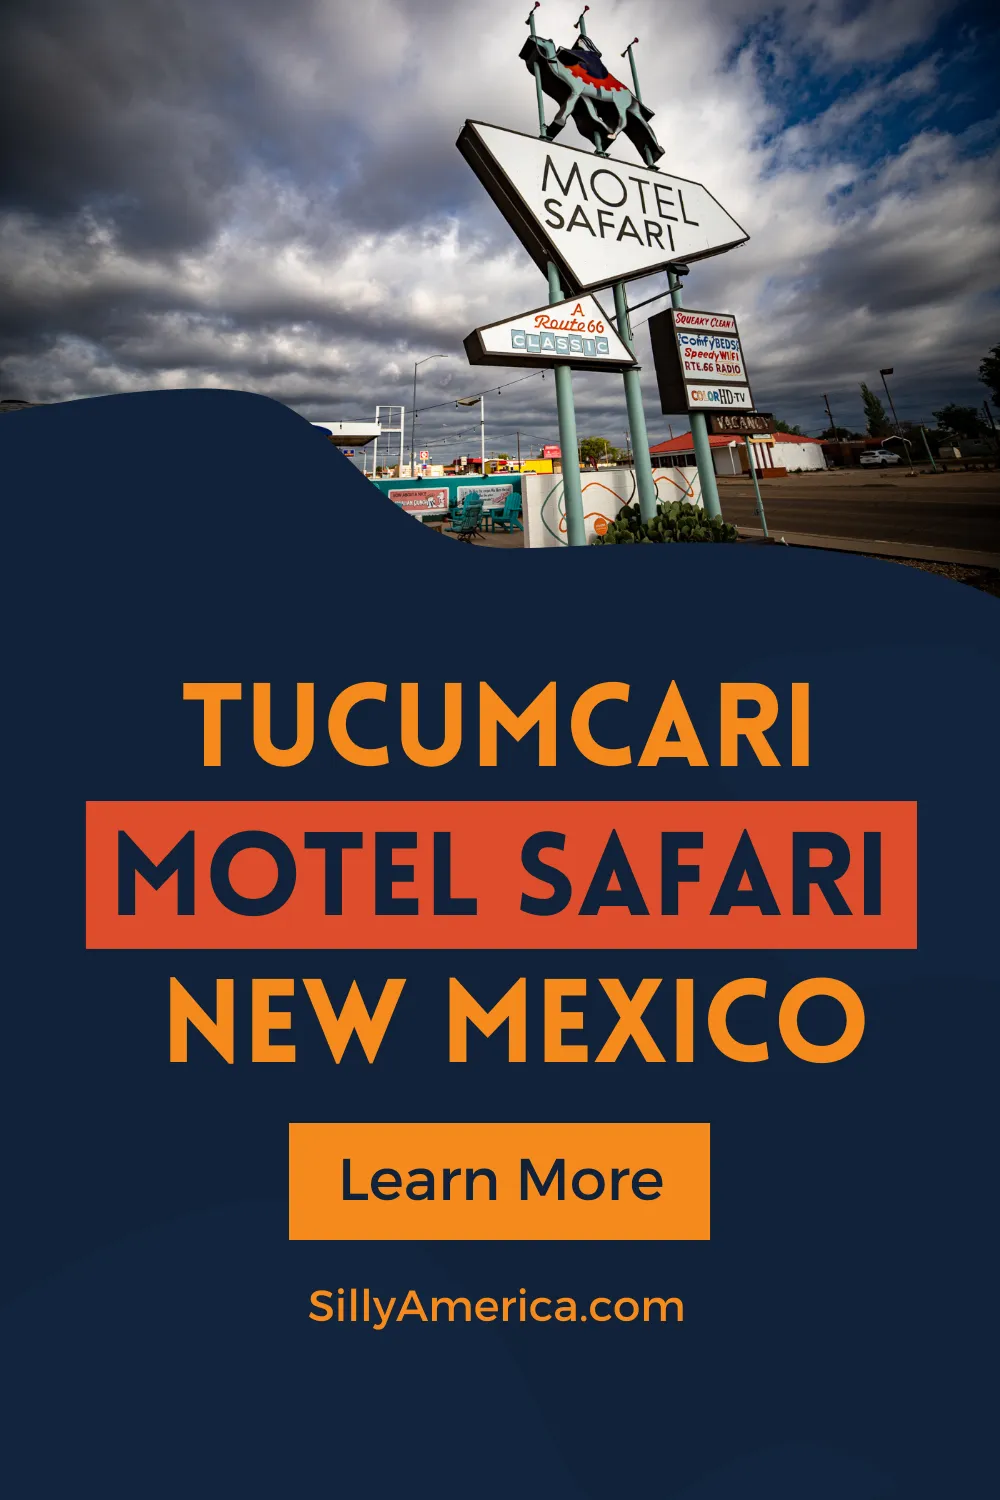 Need a good night’s sleep to get over that hump on your road trip? Just look for the camel. Motel Safari in Tucumcari, New Mexico is an iconic Route 66 motel that has been offering some of the best beds on the Mother Road for over 60 years. This vintage motel is one of the best motels on Route 66 - add Motel Safari in Tucumcari, New Mexico to your Route 66 road trip itinerary or travel bucket list! #Route66 #Route66Motel #Route66RoadTrip #Route66Motels #VintageMotels #RoadTrip #NewMexicoRoadTrip